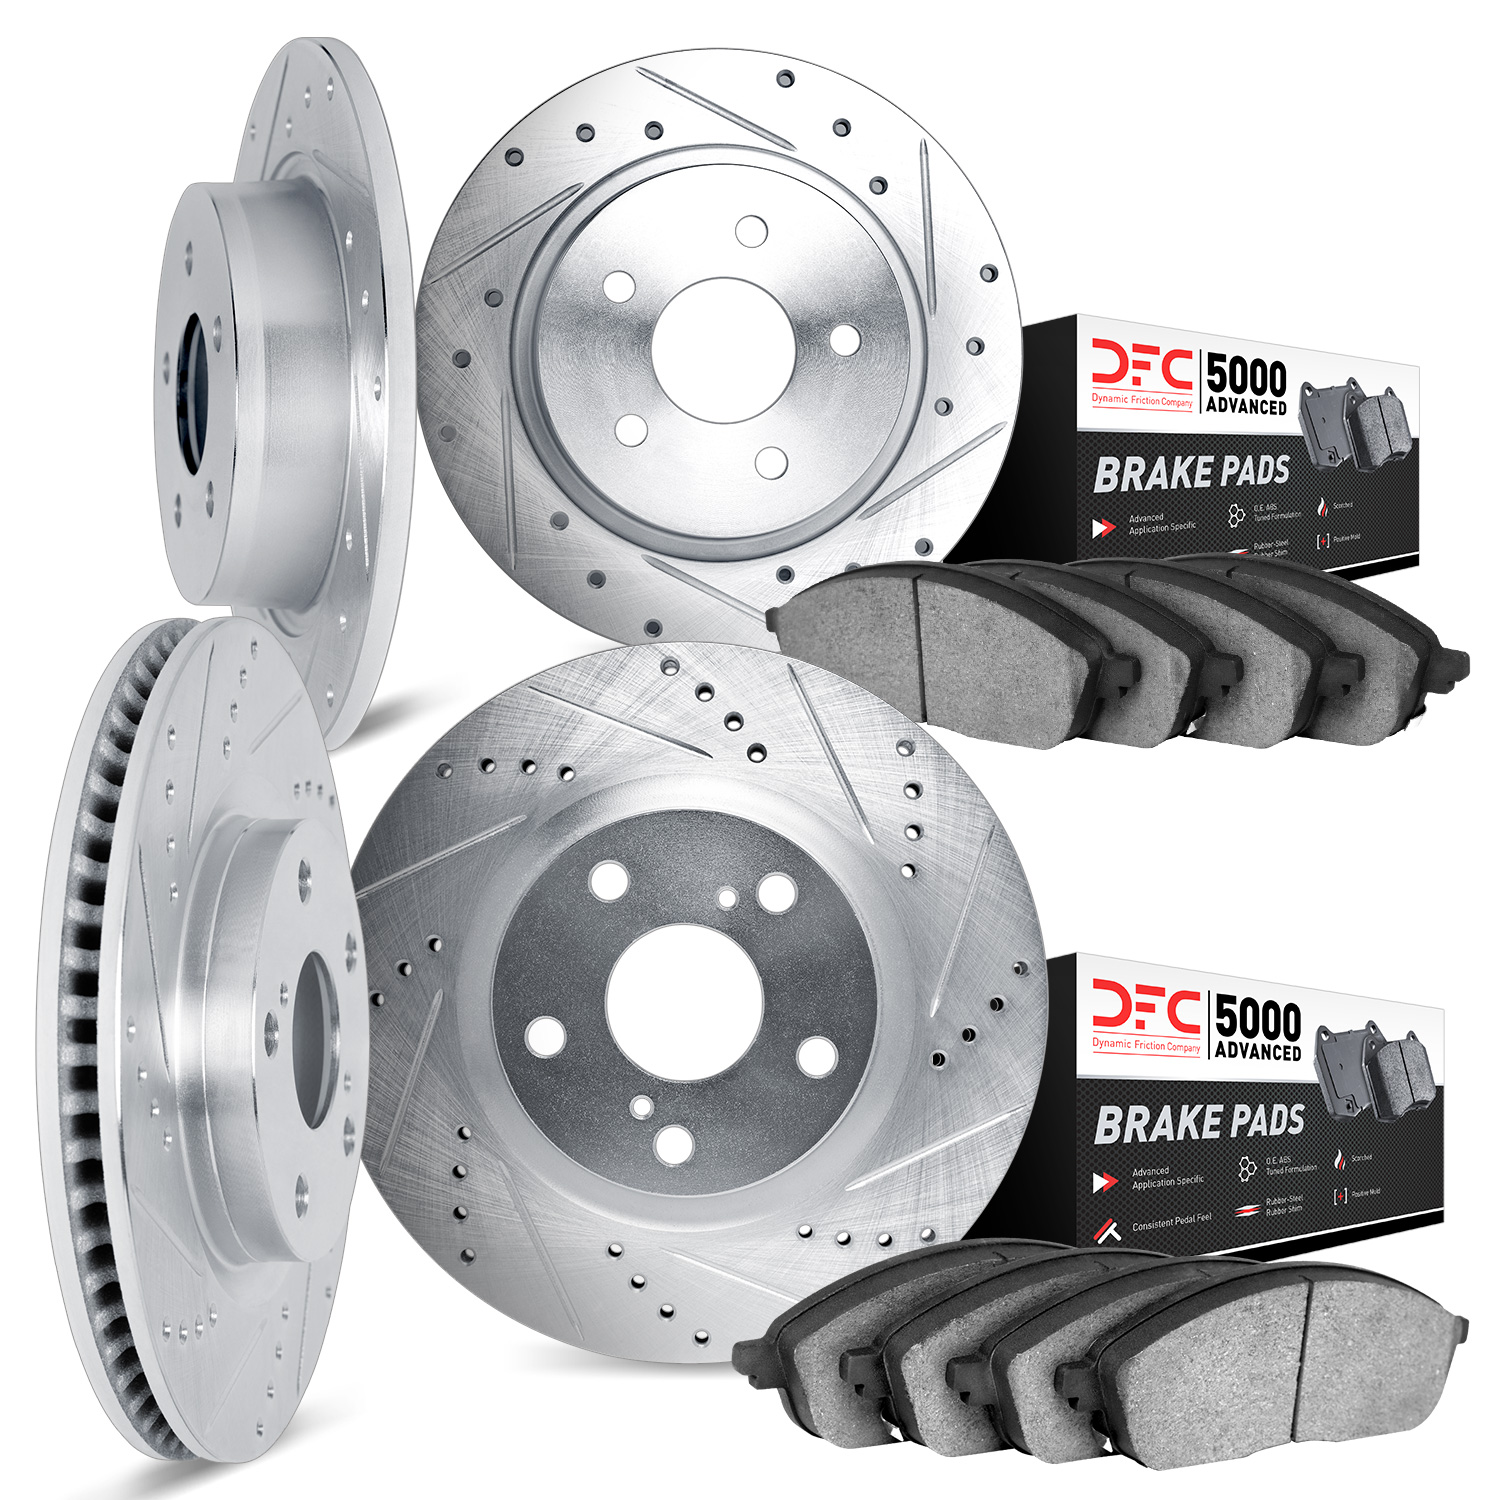 7504-54315 Drilled/Slotted Brake Rotors w/5000 Advanced Brake Pads Kit [Silver], 1995-2002 Ford/Lincoln/Mercury/Mazda, Position: